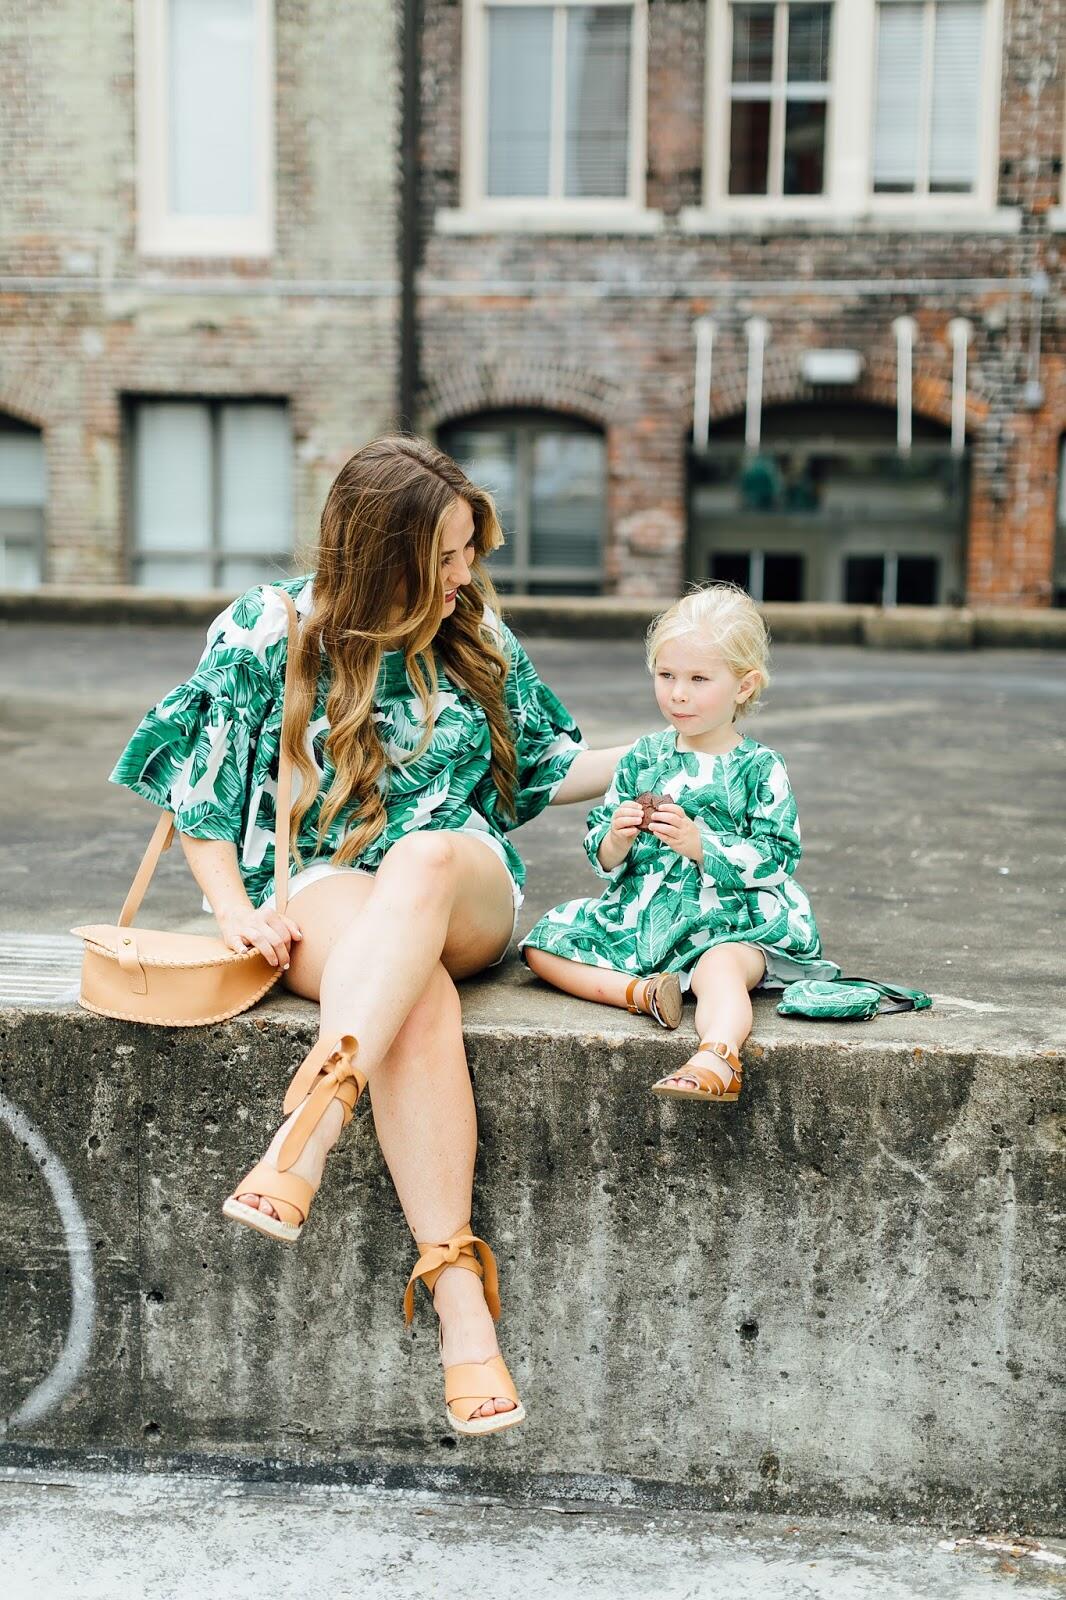 The Perfect On the Go Snacks for Picky Eaters - 5 Tips to Help Your Toddler Eat More Veggies by popular blogger Walking in Memphis in High Heels